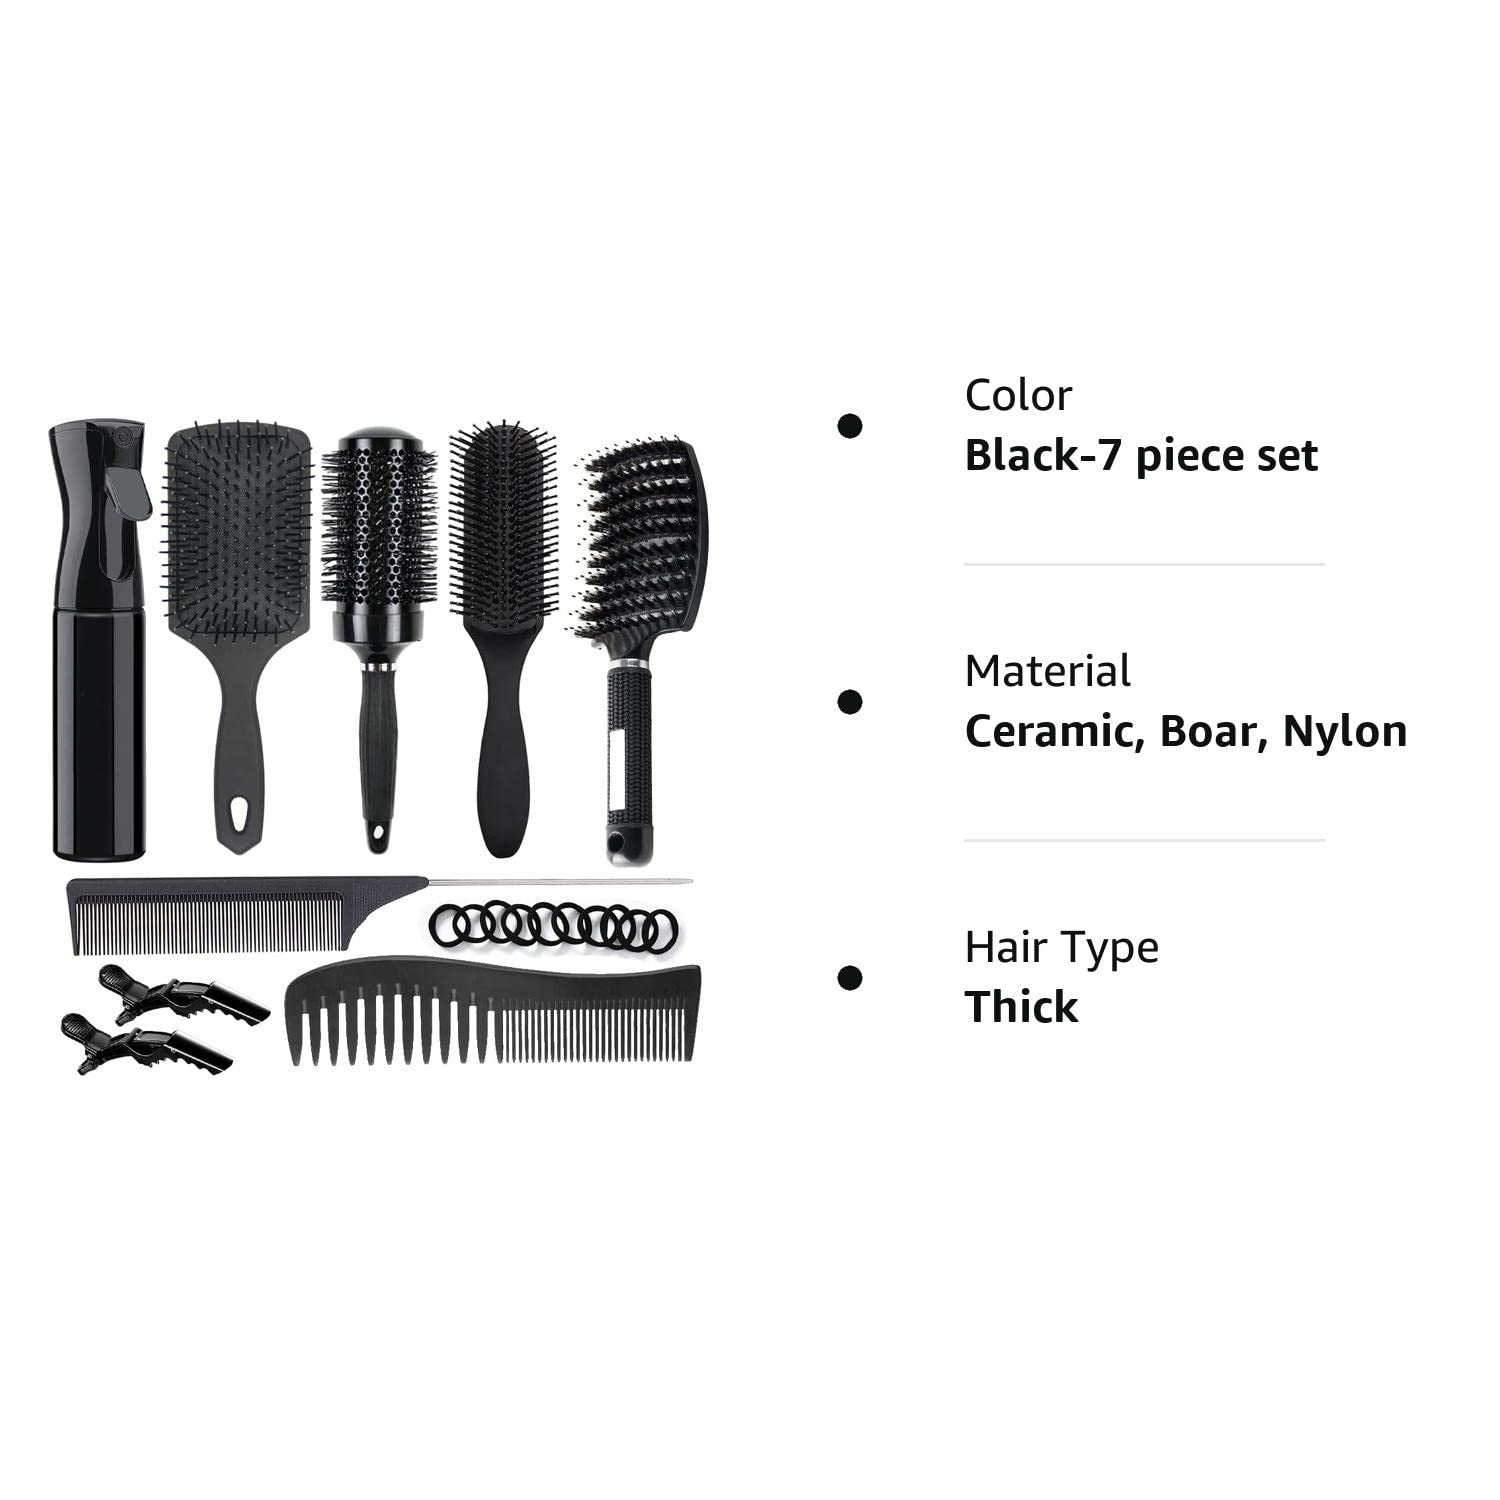 9PCS Hair Brush Set Round Brush and Paddle Hair Brush Great On Wet Long Thick Hair, Detangling Brush and Spray Bottle for Wavy Curly Hair, Meet Your Family's Daily Hair Care Needs Black